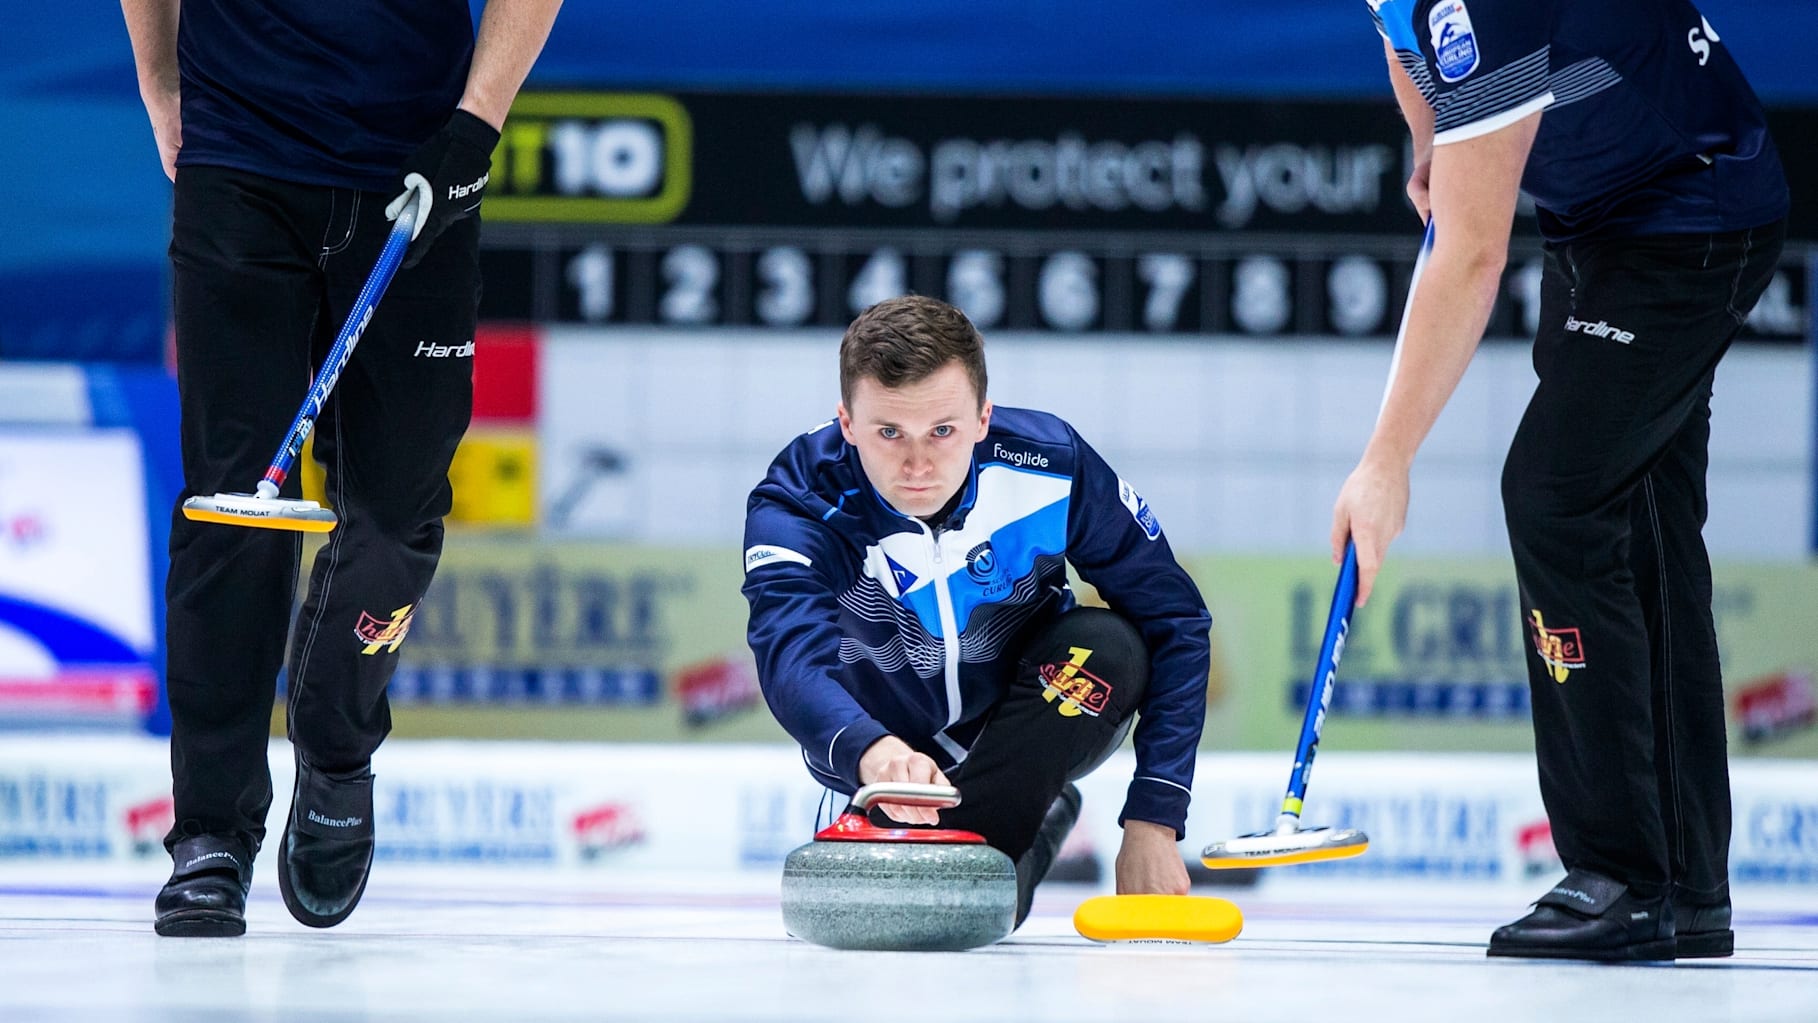 2023 World Mens Curling Championship All results, scores, schedule and standings